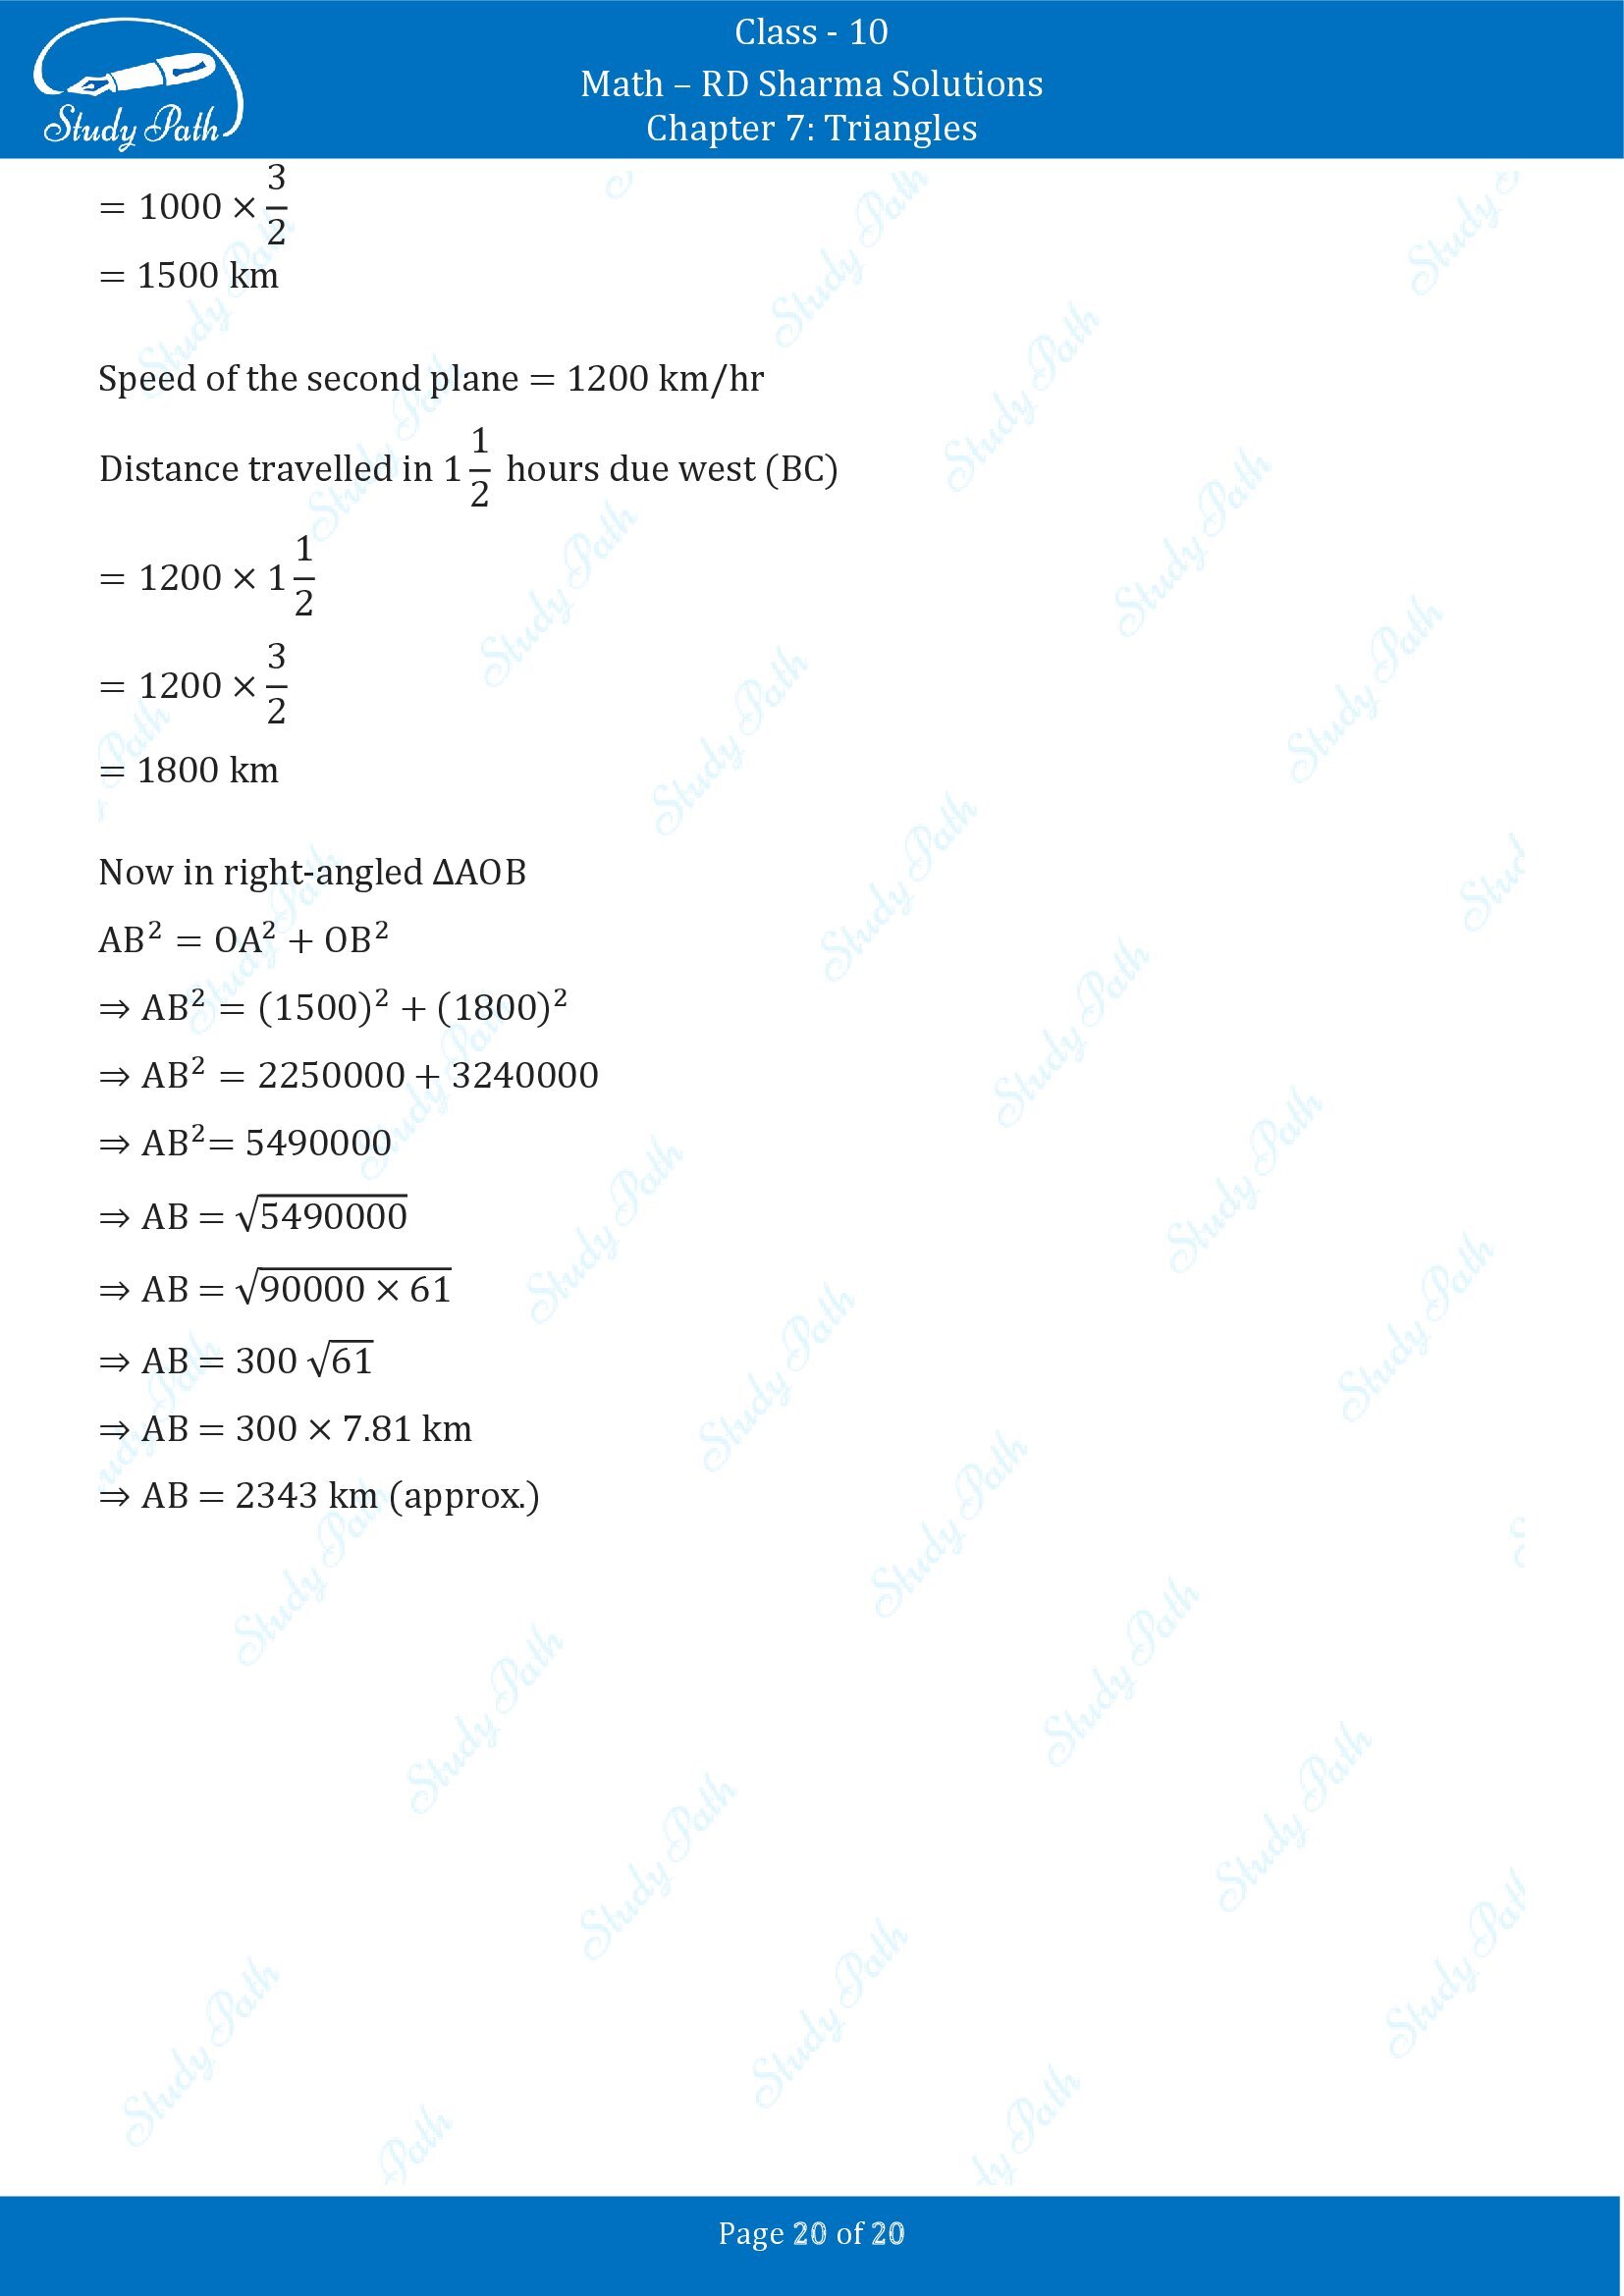 RD Sharma Solutions Class 10 Chapter 7 Triangles Exercise 7.7 00020